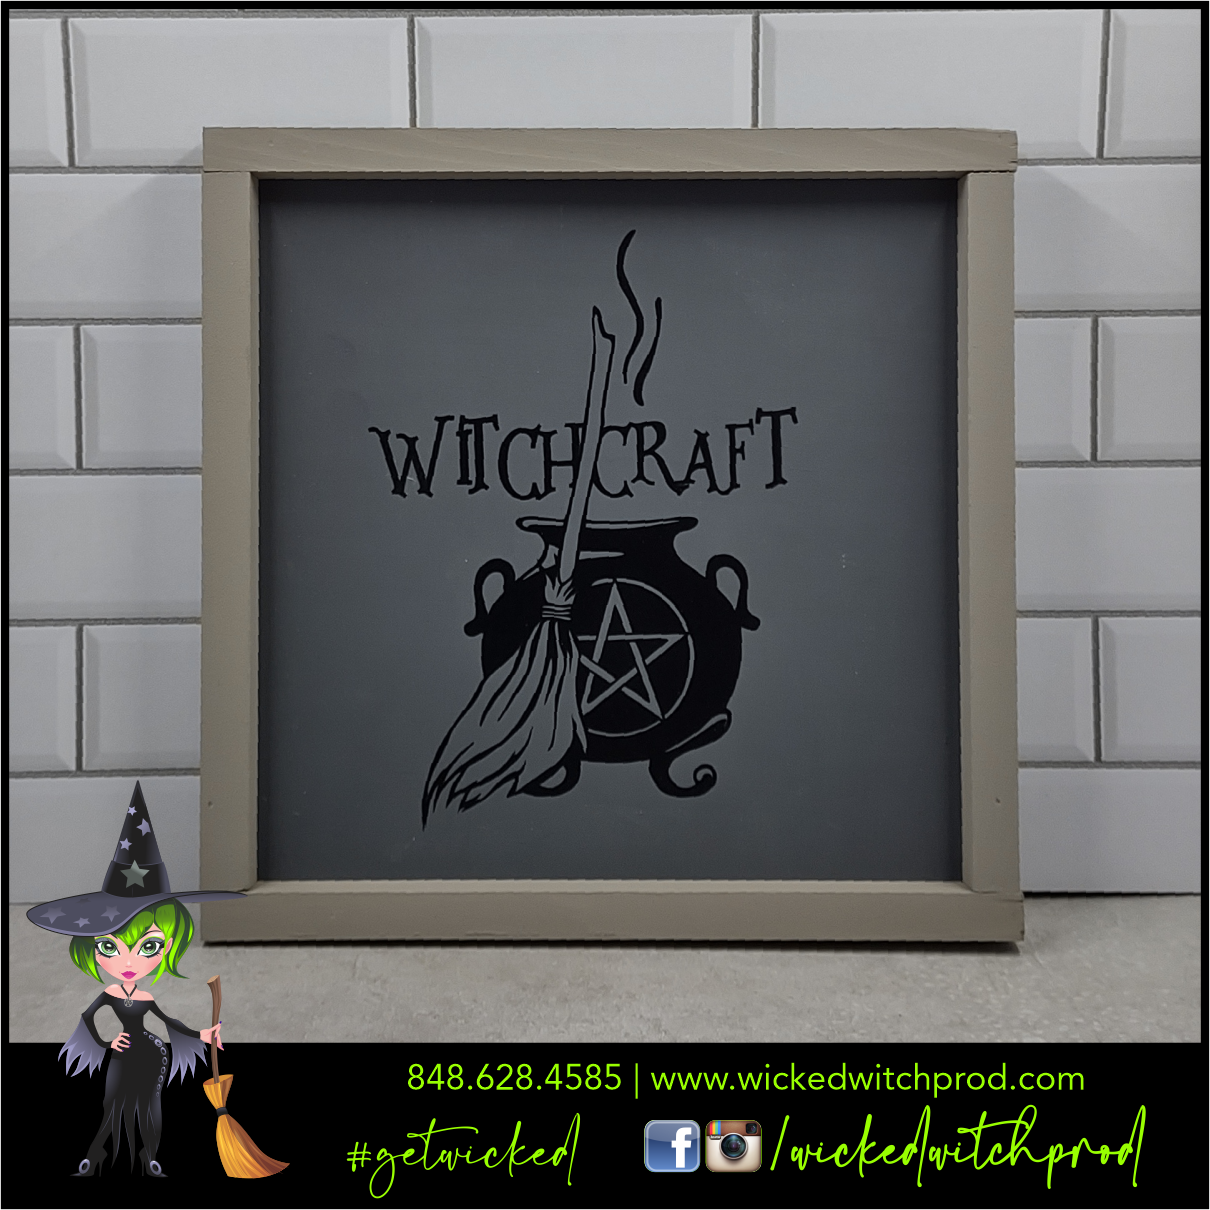 Witchcraft Wicked Farmhouse Sign